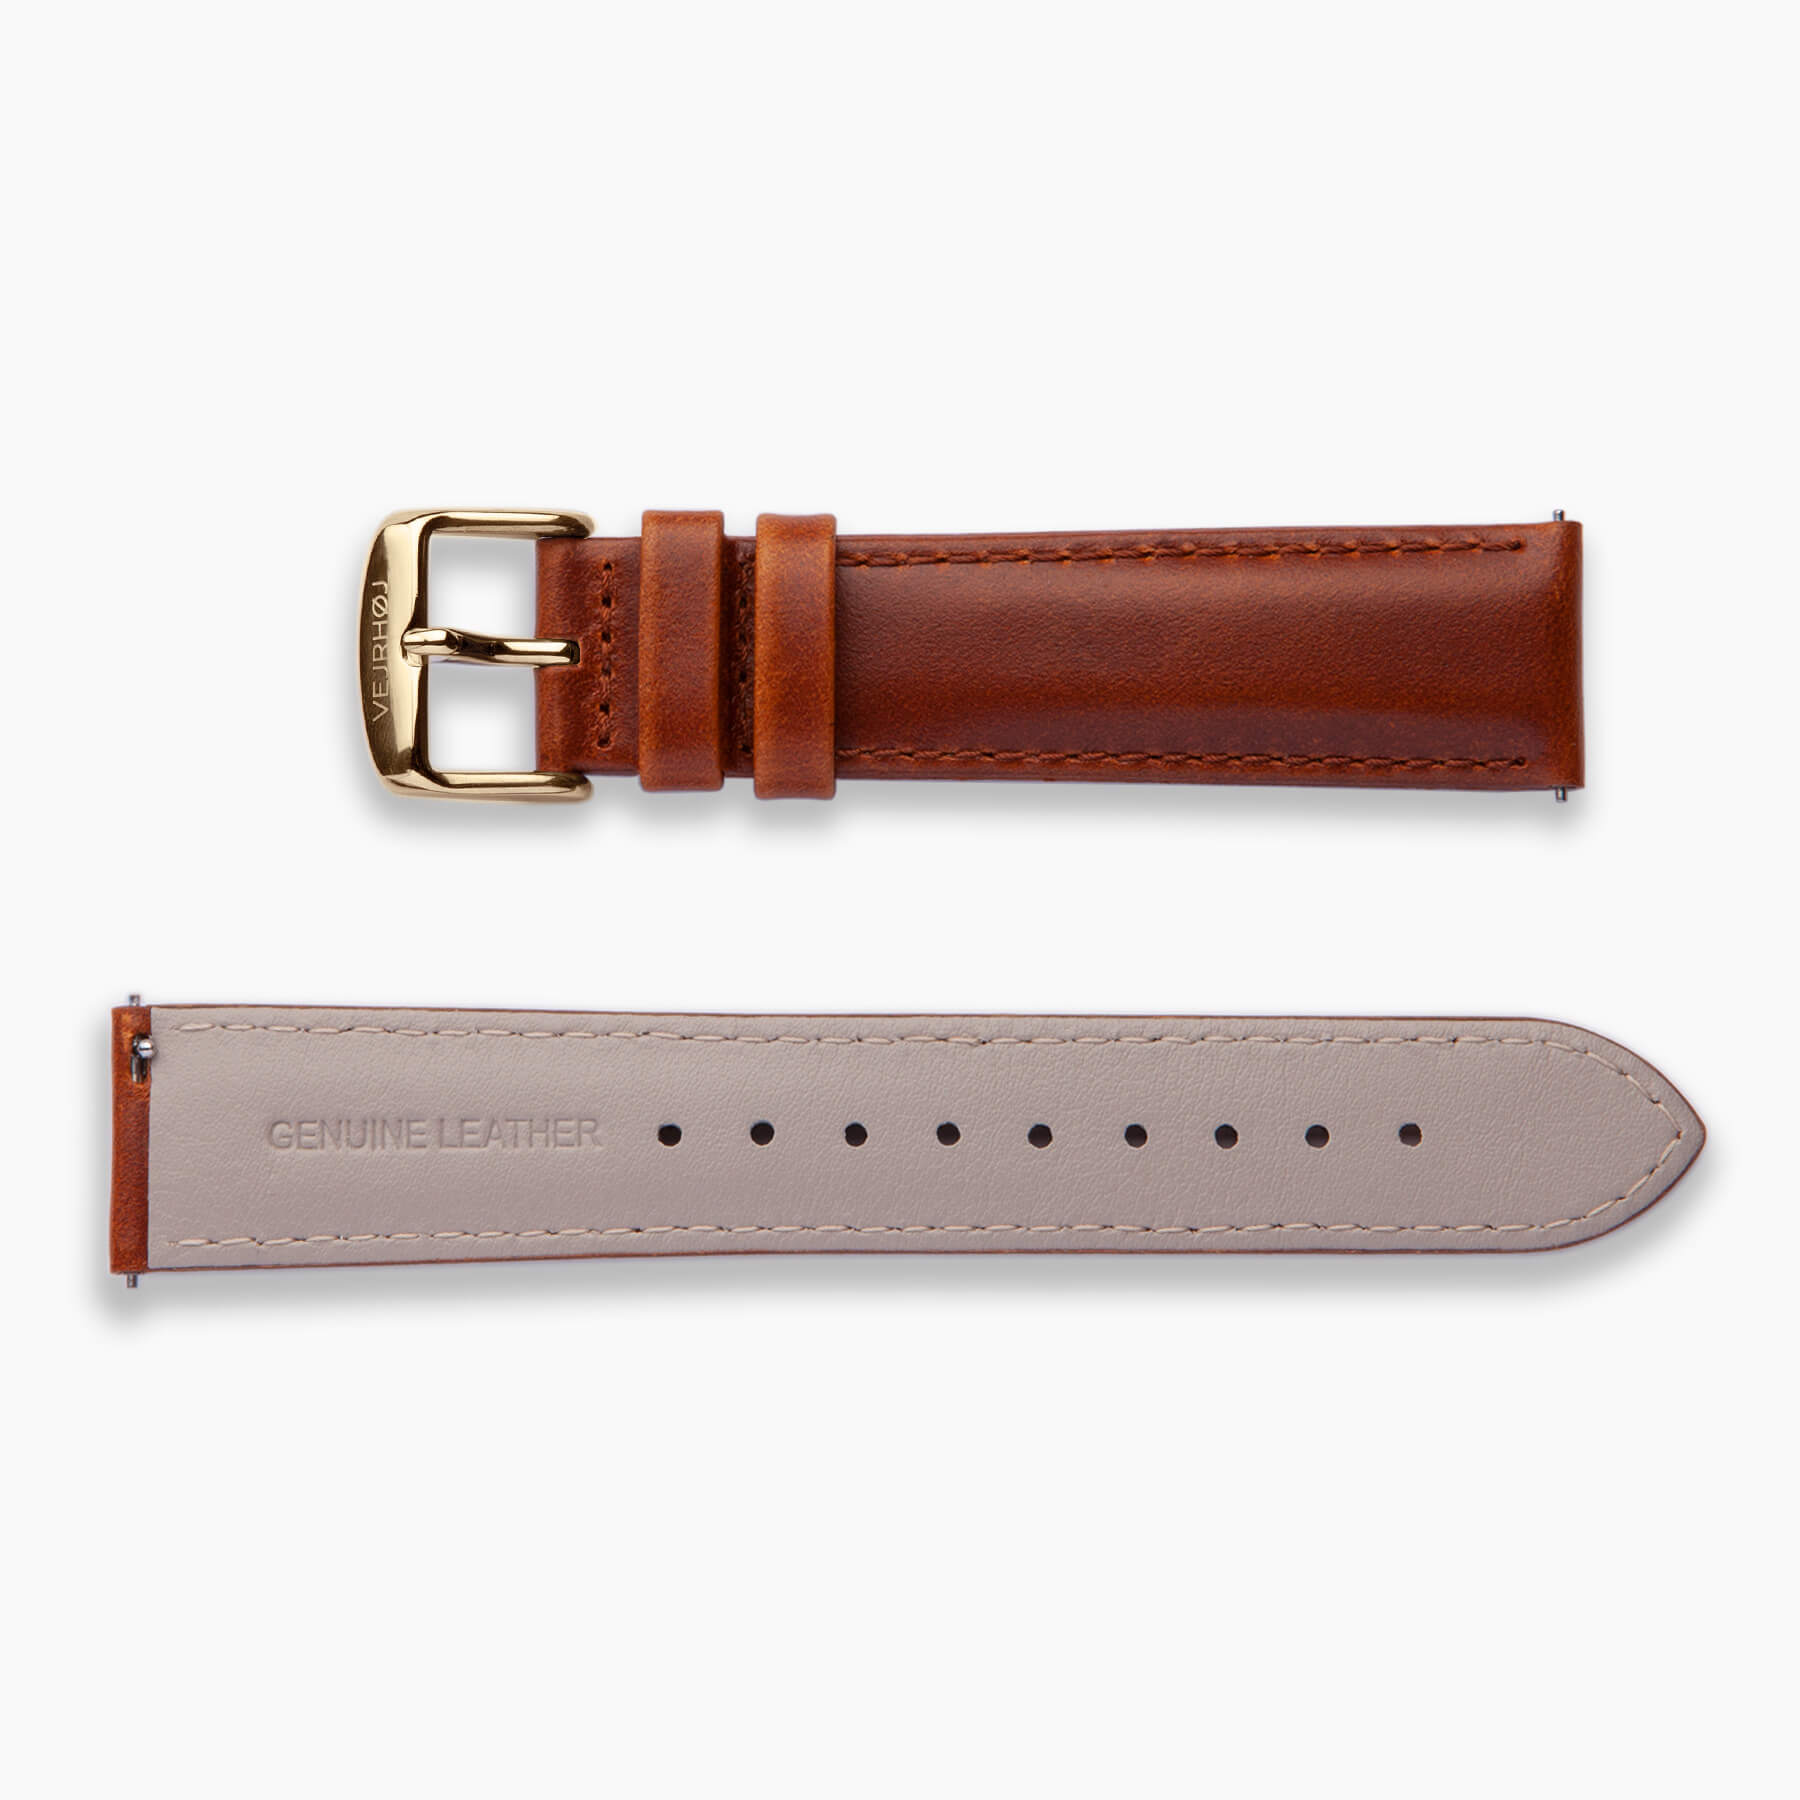 Caramel coloured strap with gold buckle